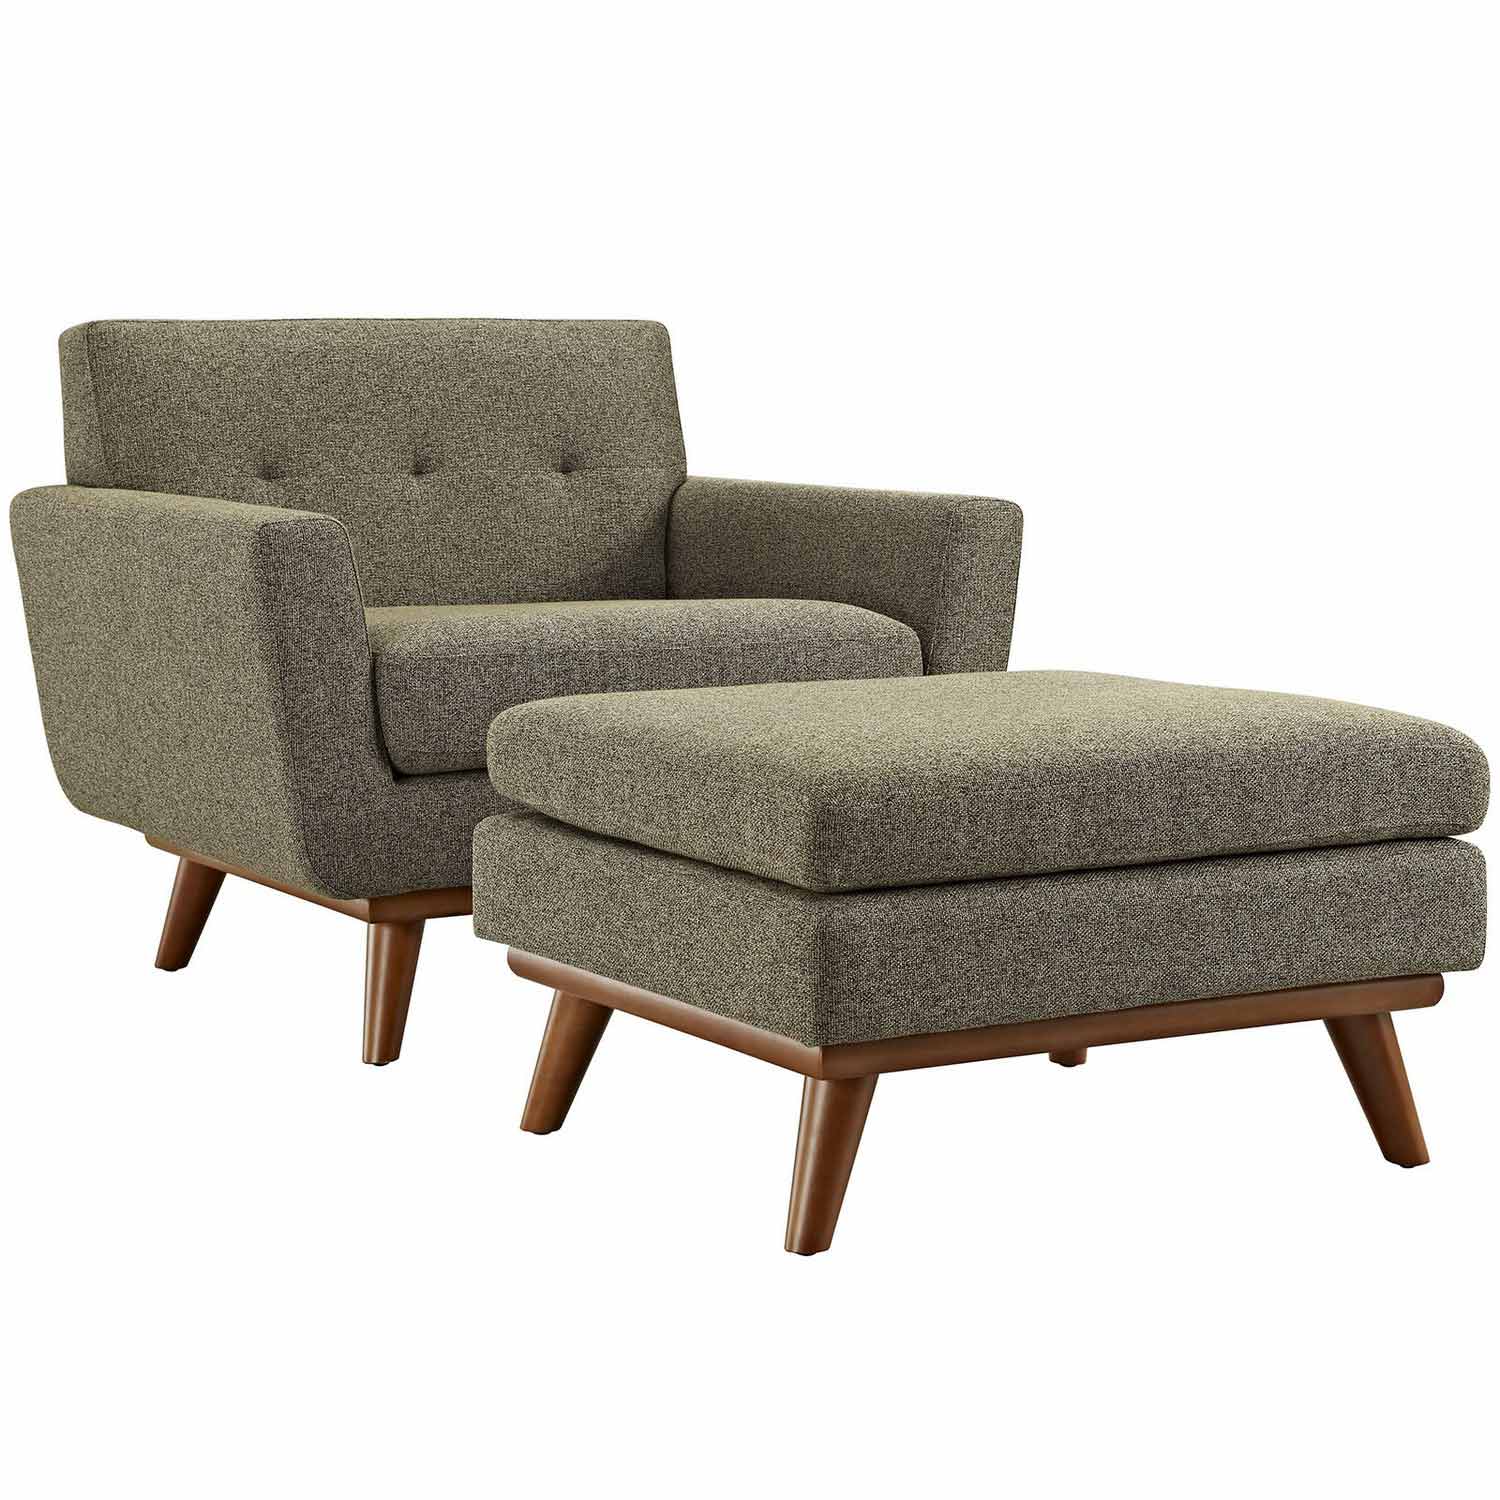 Modway Engage 2 Piece Chair and Ottoman - Oatmeal